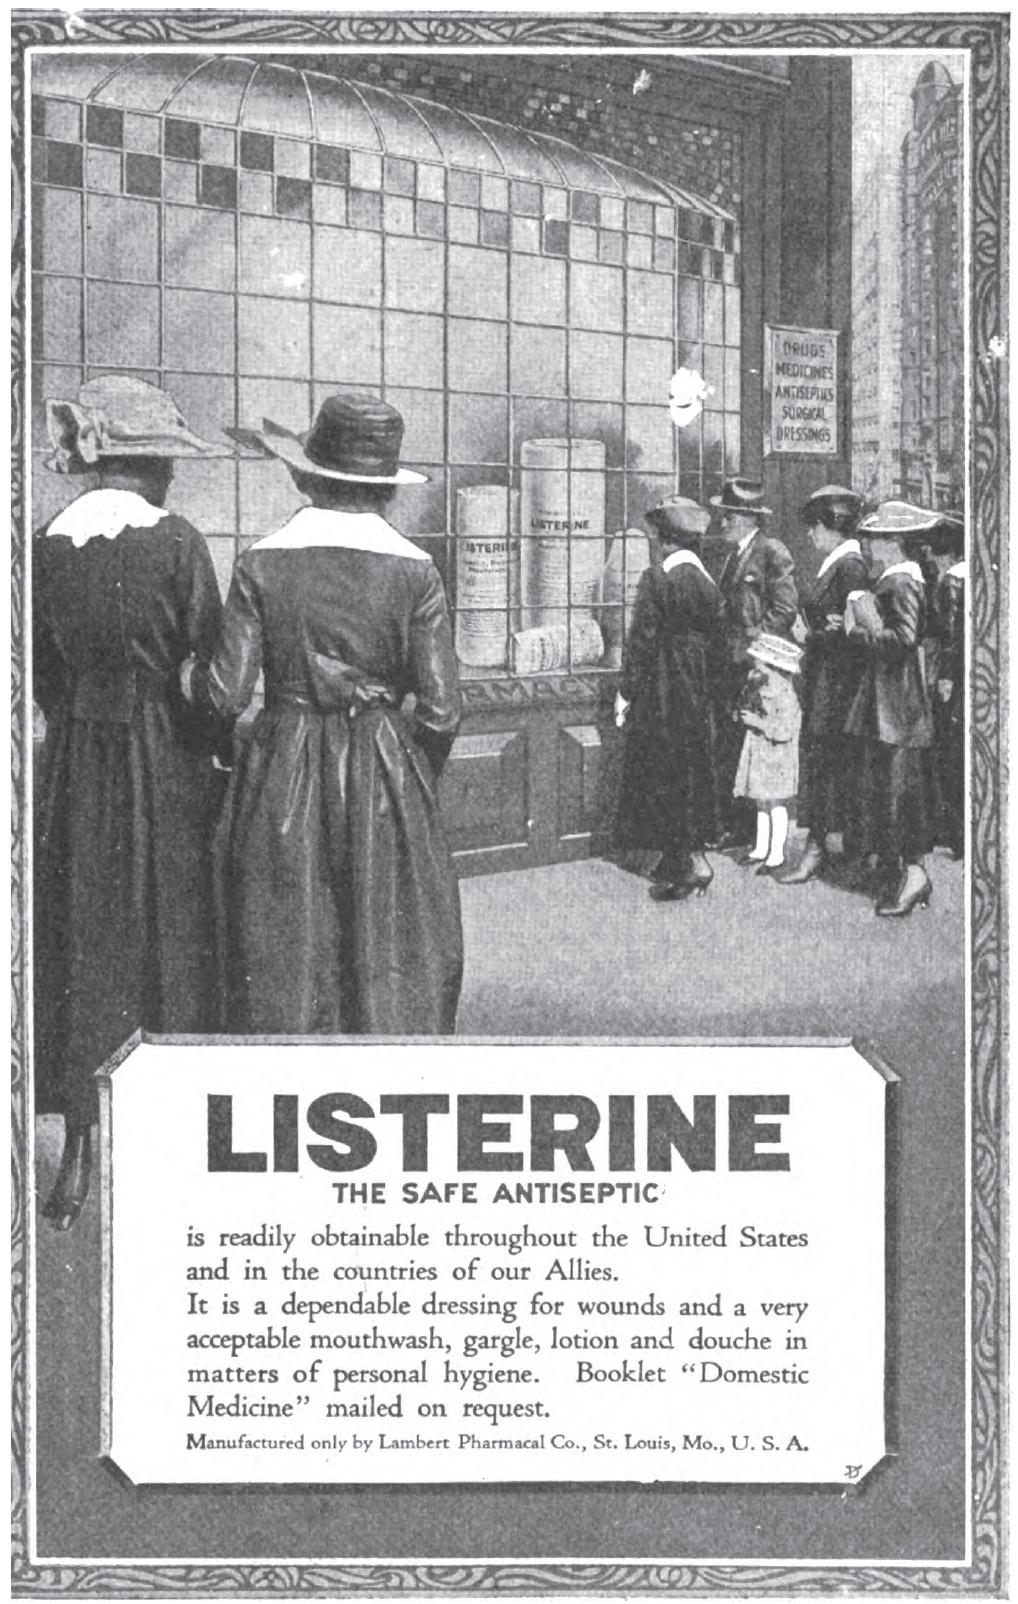 an old advertit from the late 20th century advertising